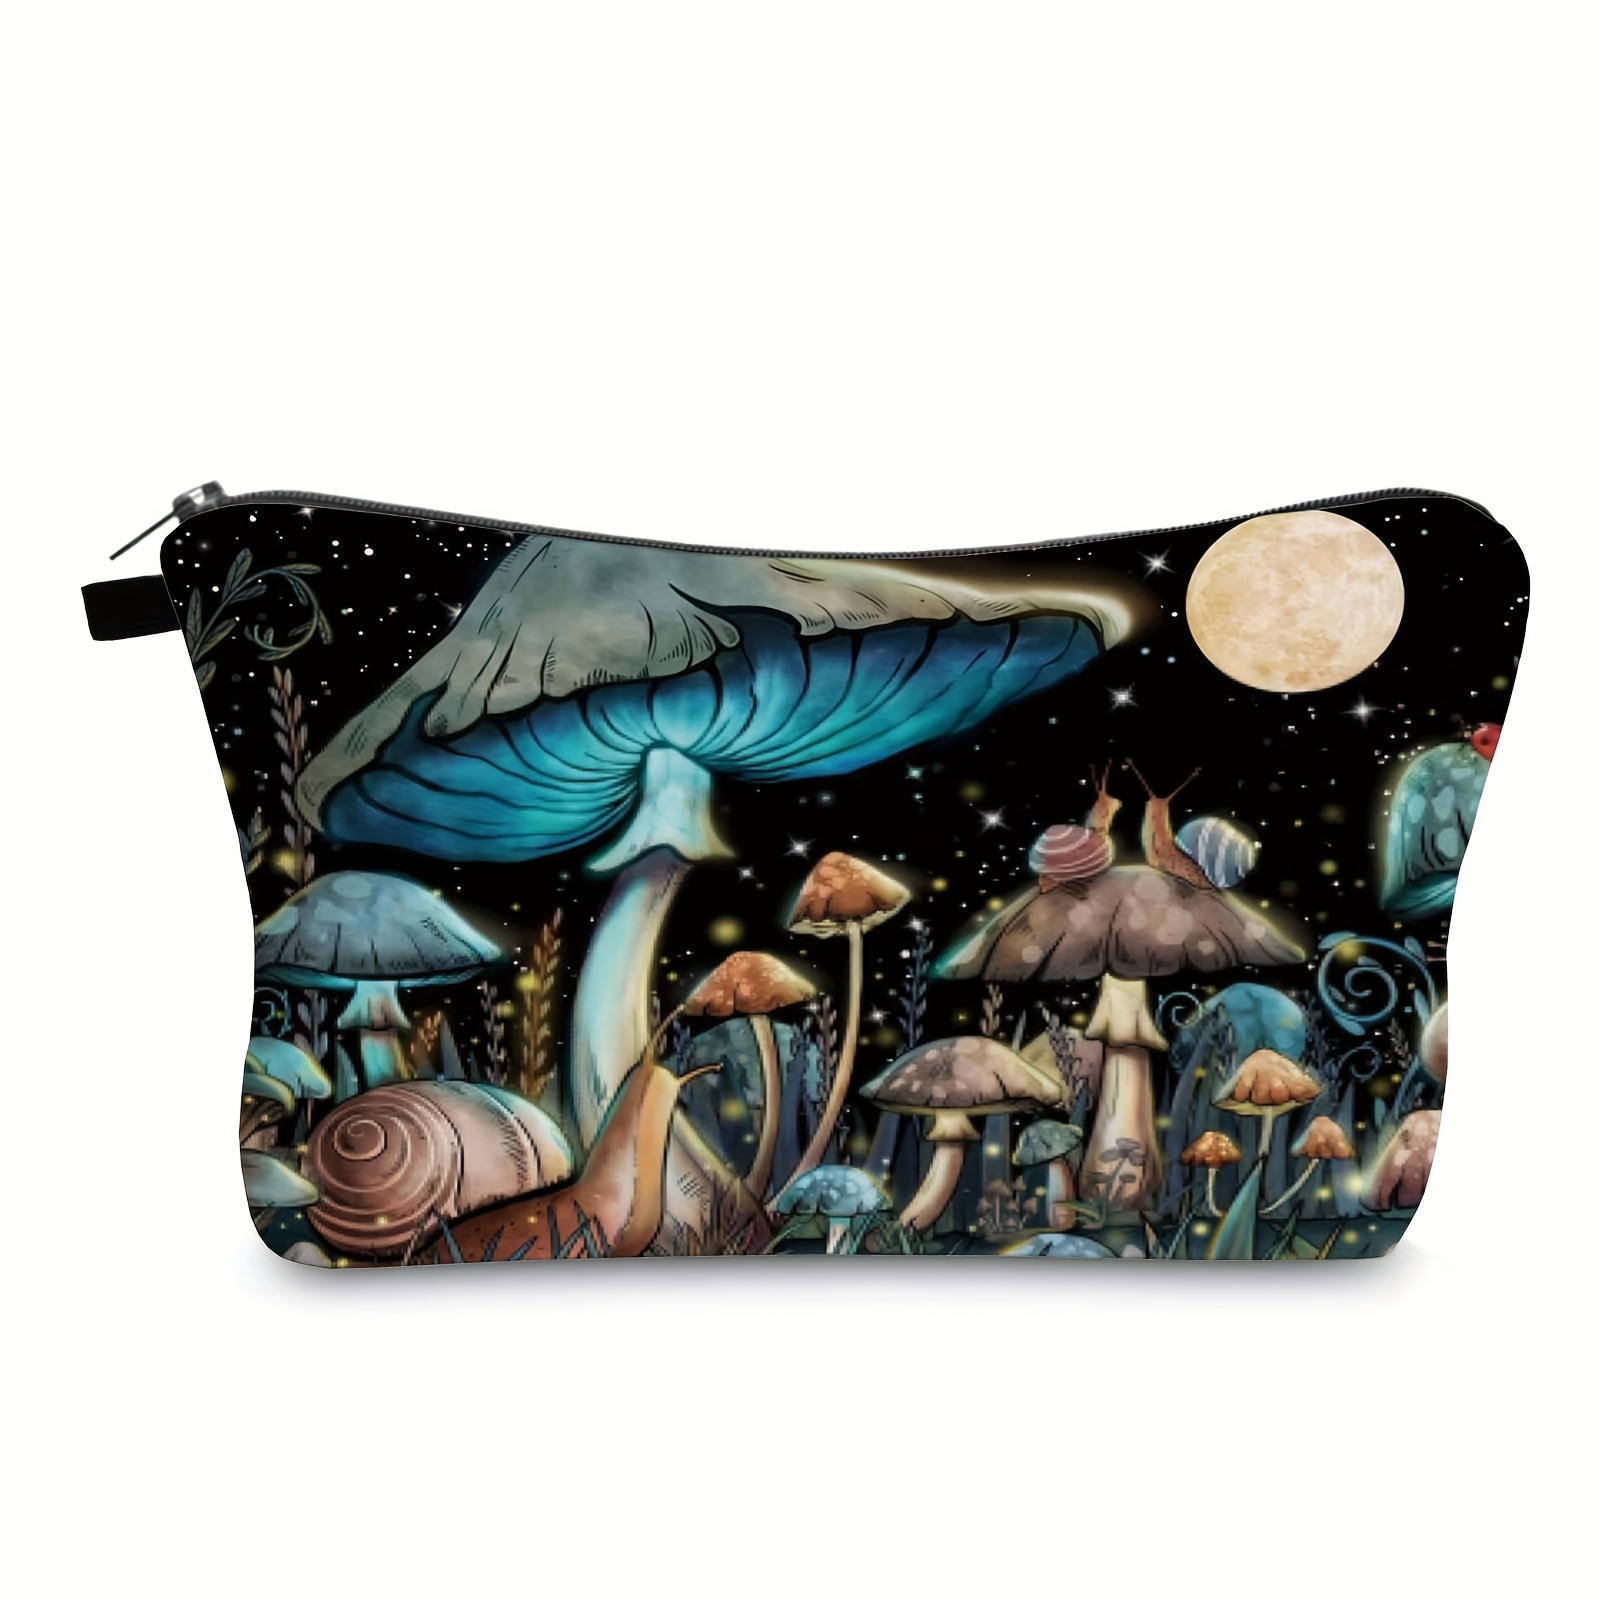 

Cute Portable Mushroom Print Makeup Bag With Zipper Small Waterproof Cosmetic Case Travel Organizer Bag Toiletry Storage Pouch For Purse Women (black Night)